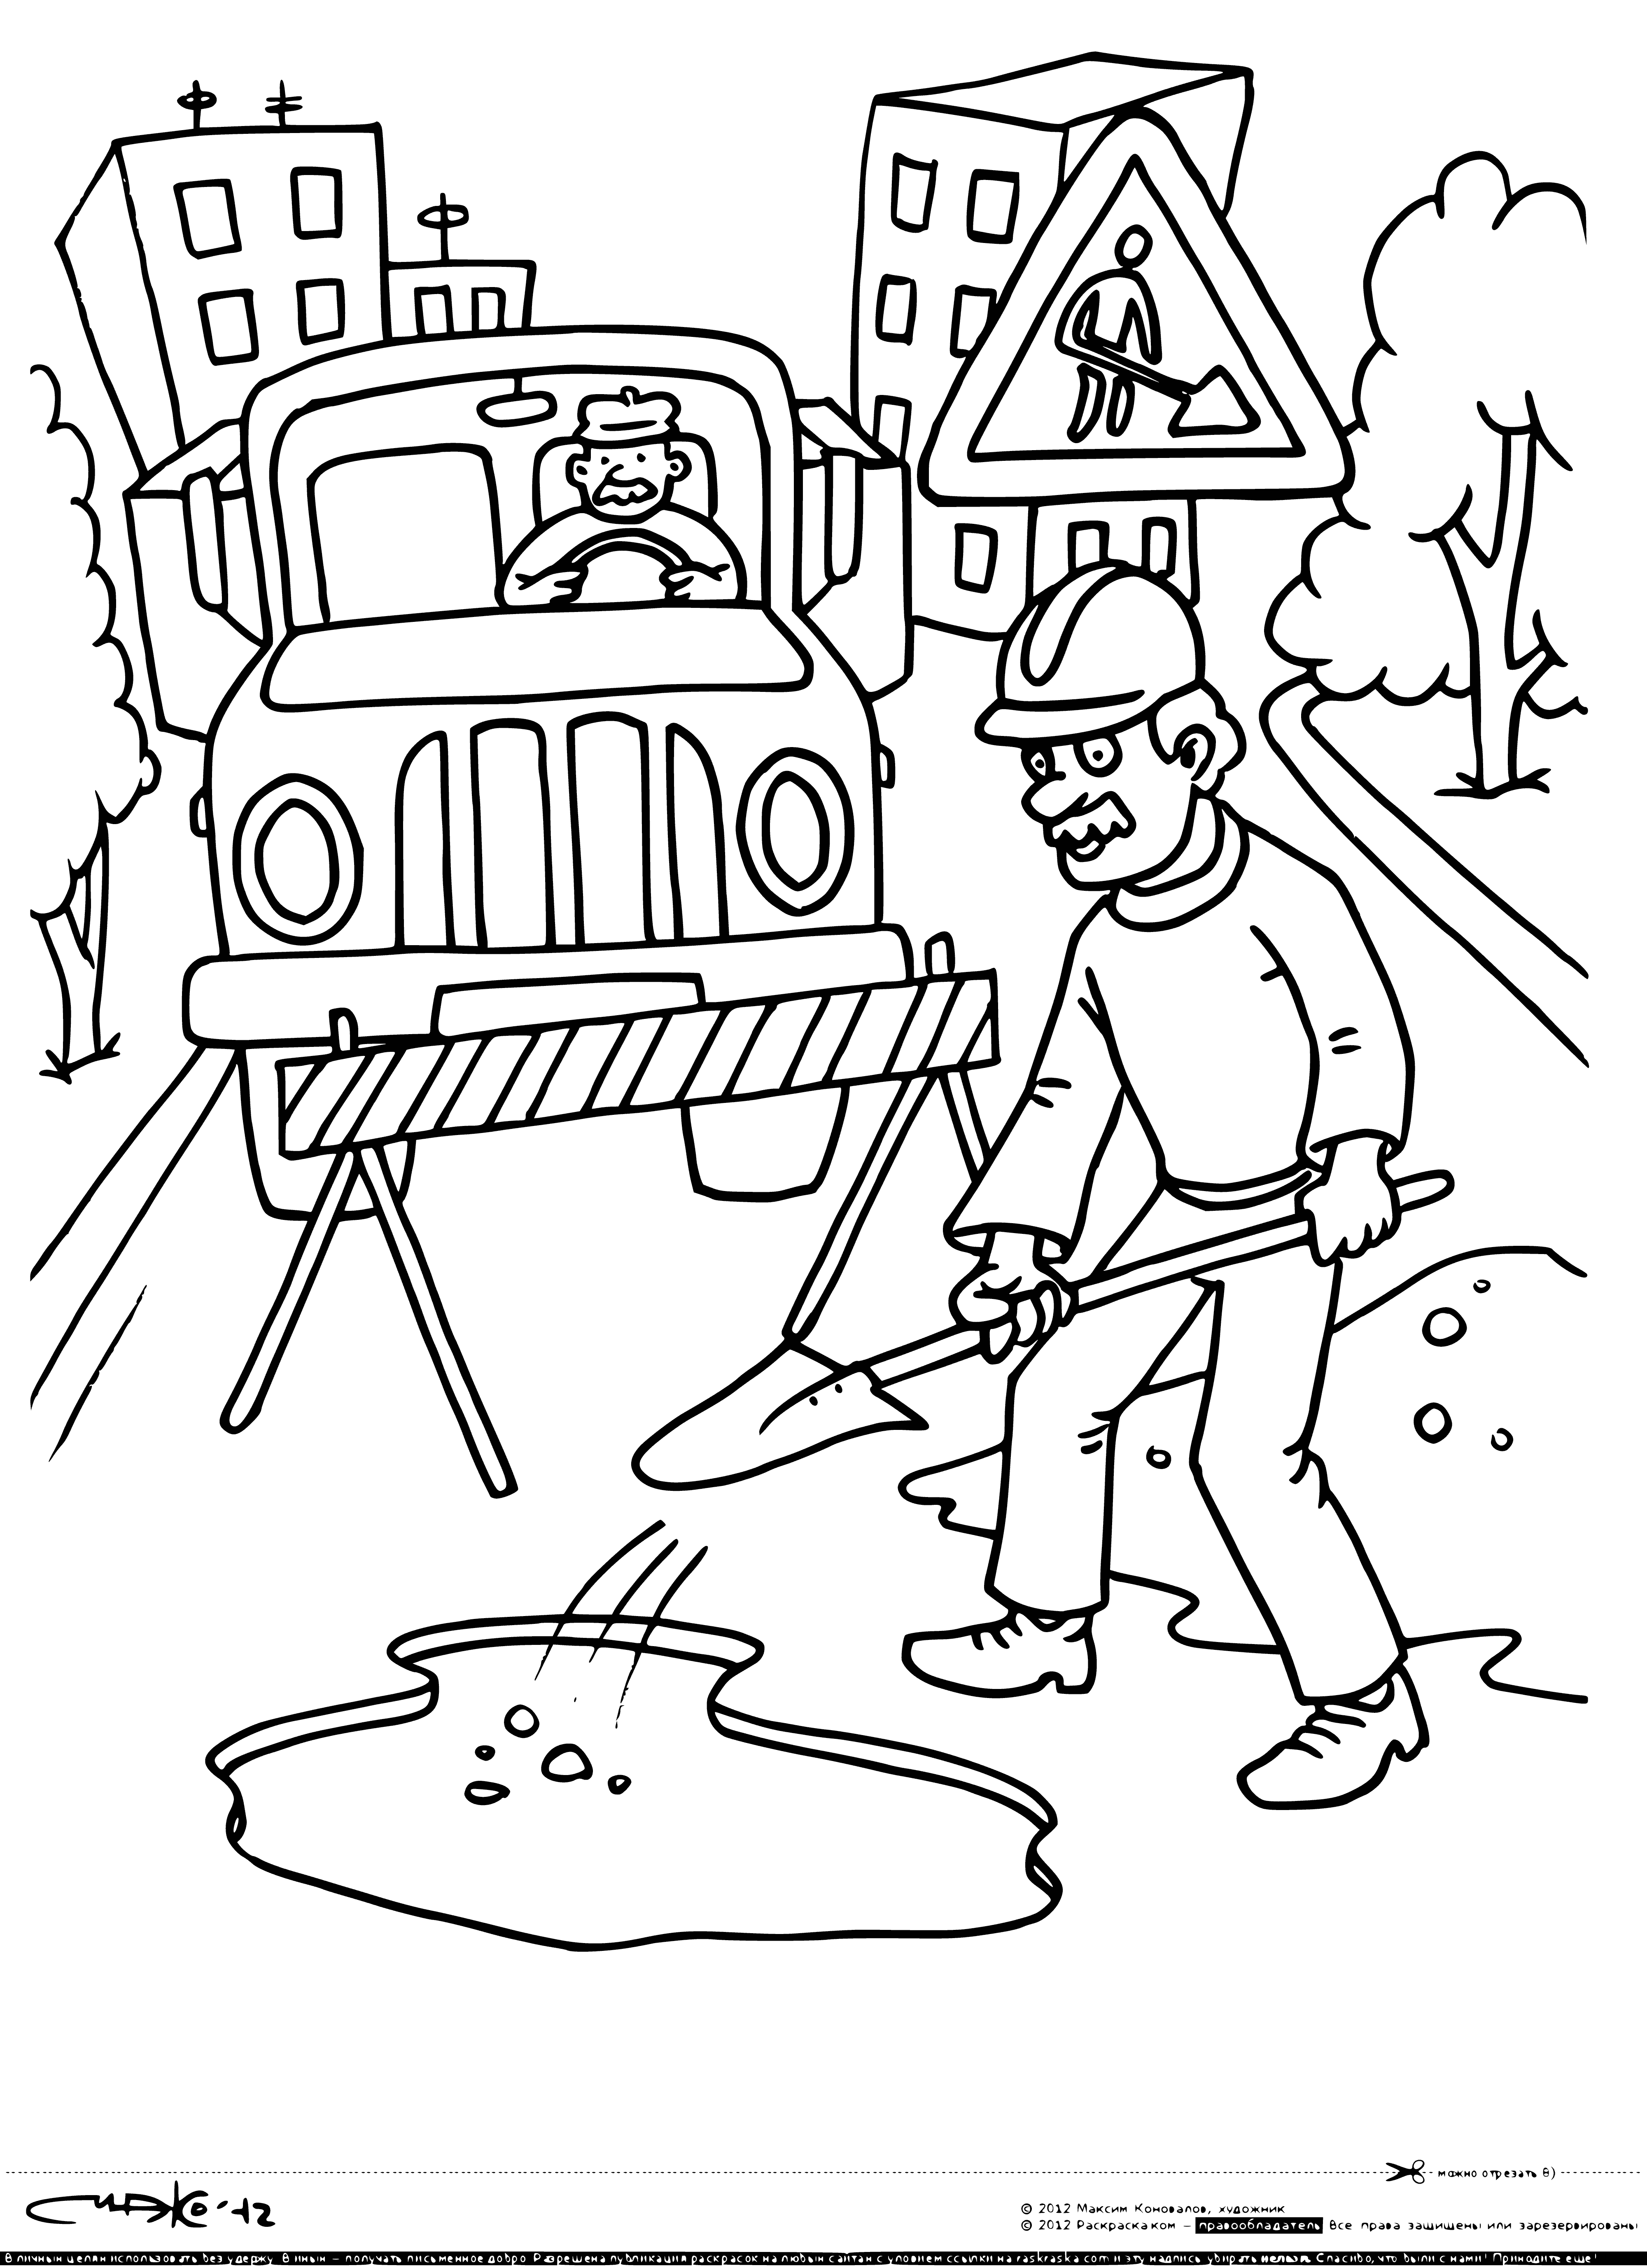 coloring page: Two red rect. signs: left has stop sign pic., right has const. worker pic. Each with "STOP" in black letters. Both w/ red bord.